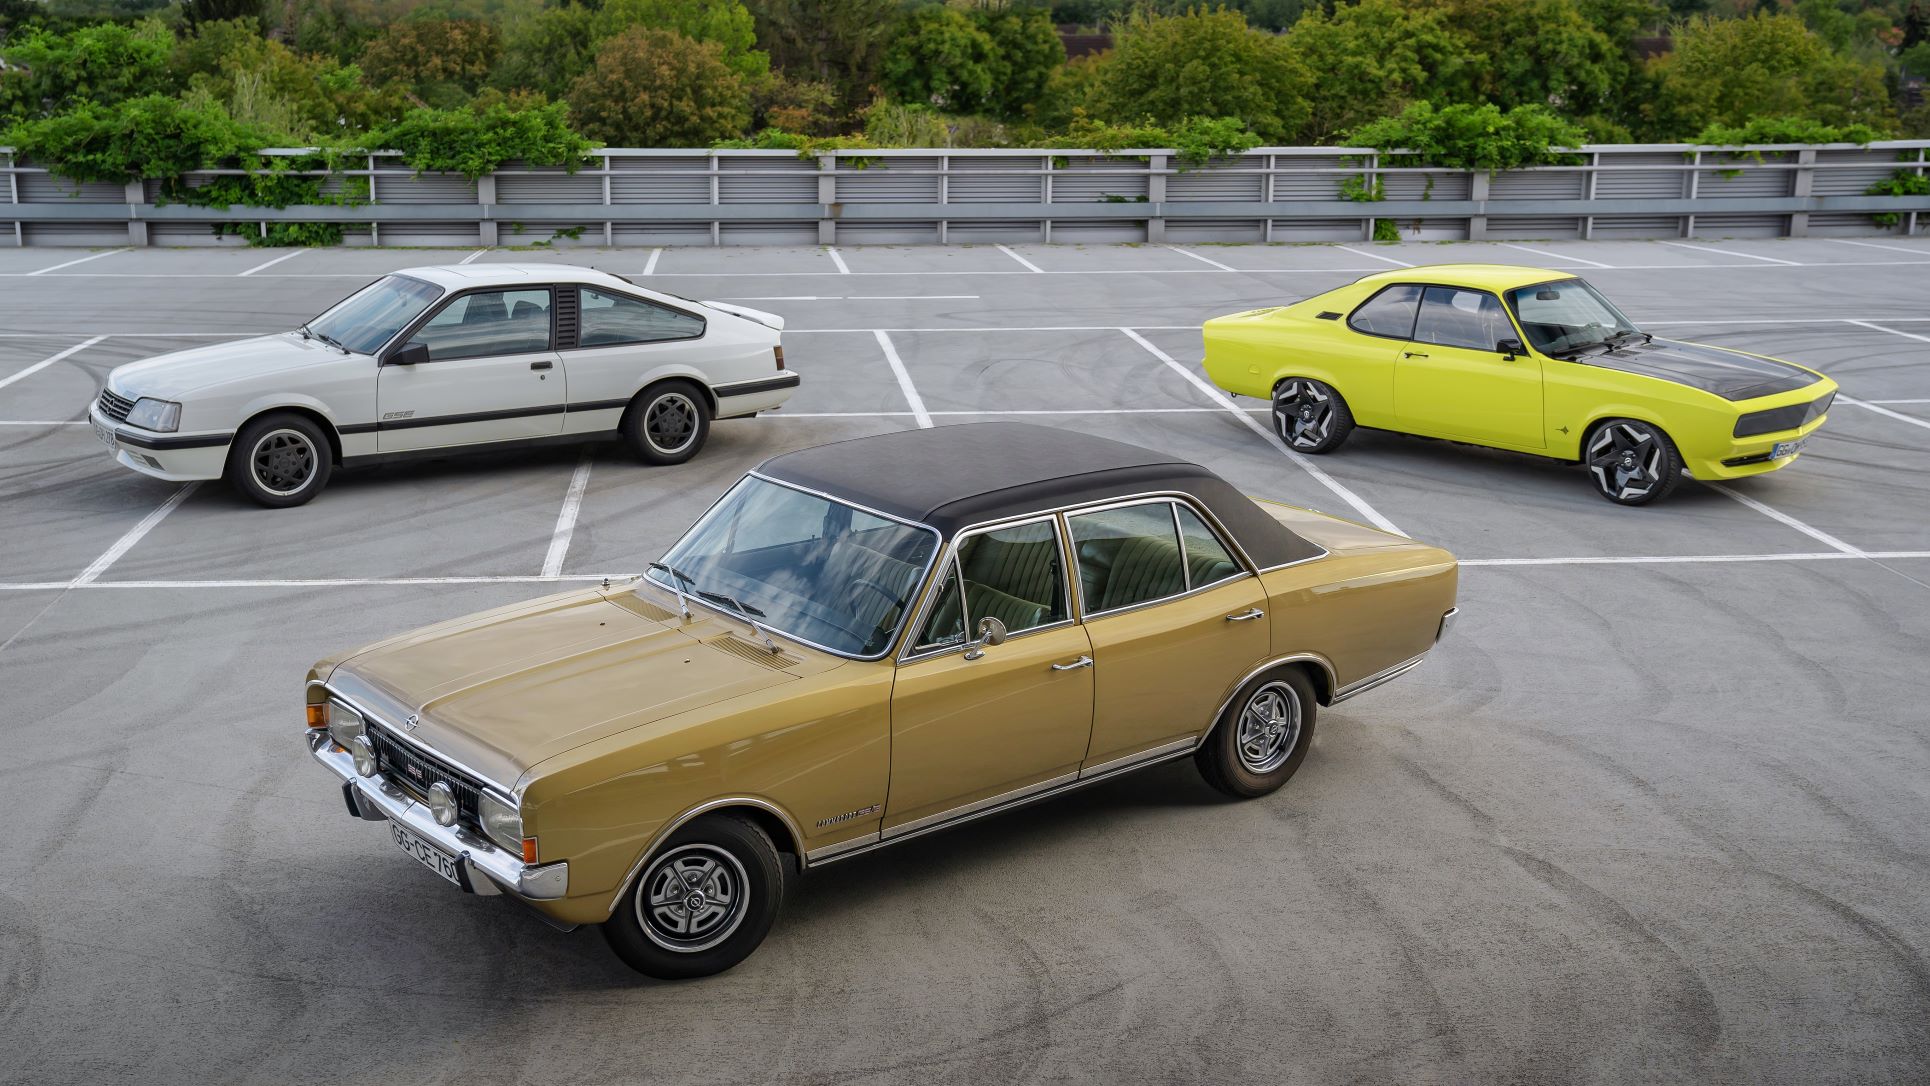 Three of the most famous Opel cars to wear the GSe logo. The Commodore GS/E, Monza GSe and Manta GSe